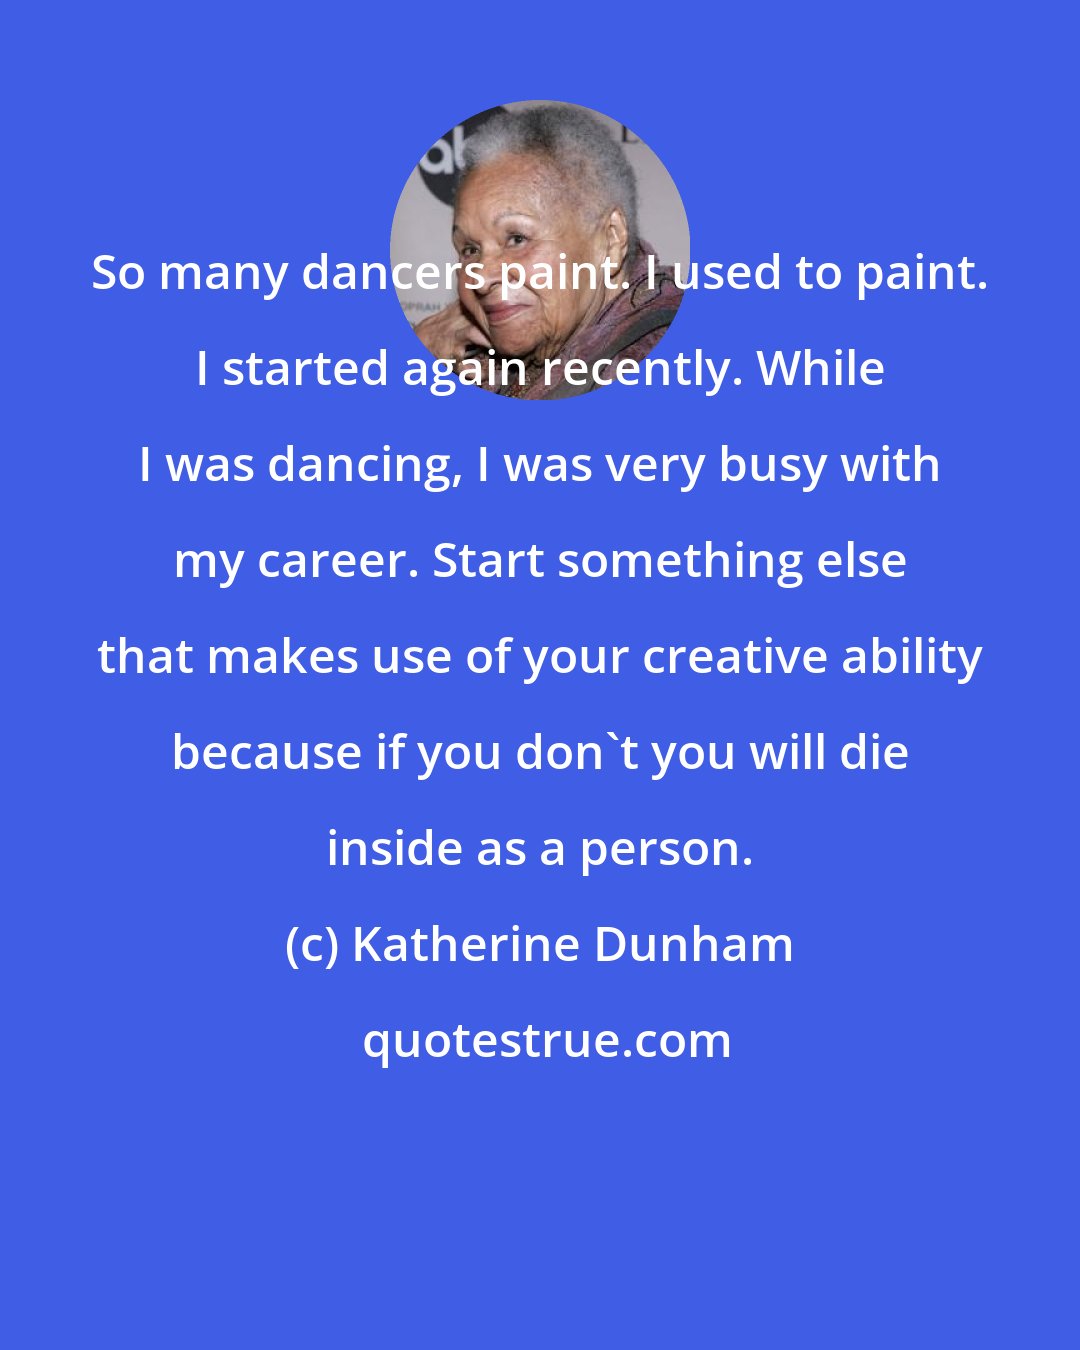 Katherine Dunham: So many dancers paint. I used to paint. I started again recently. While I was dancing, I was very busy with my career. Start something else that makes use of your creative ability because if you don't you will die inside as a person.